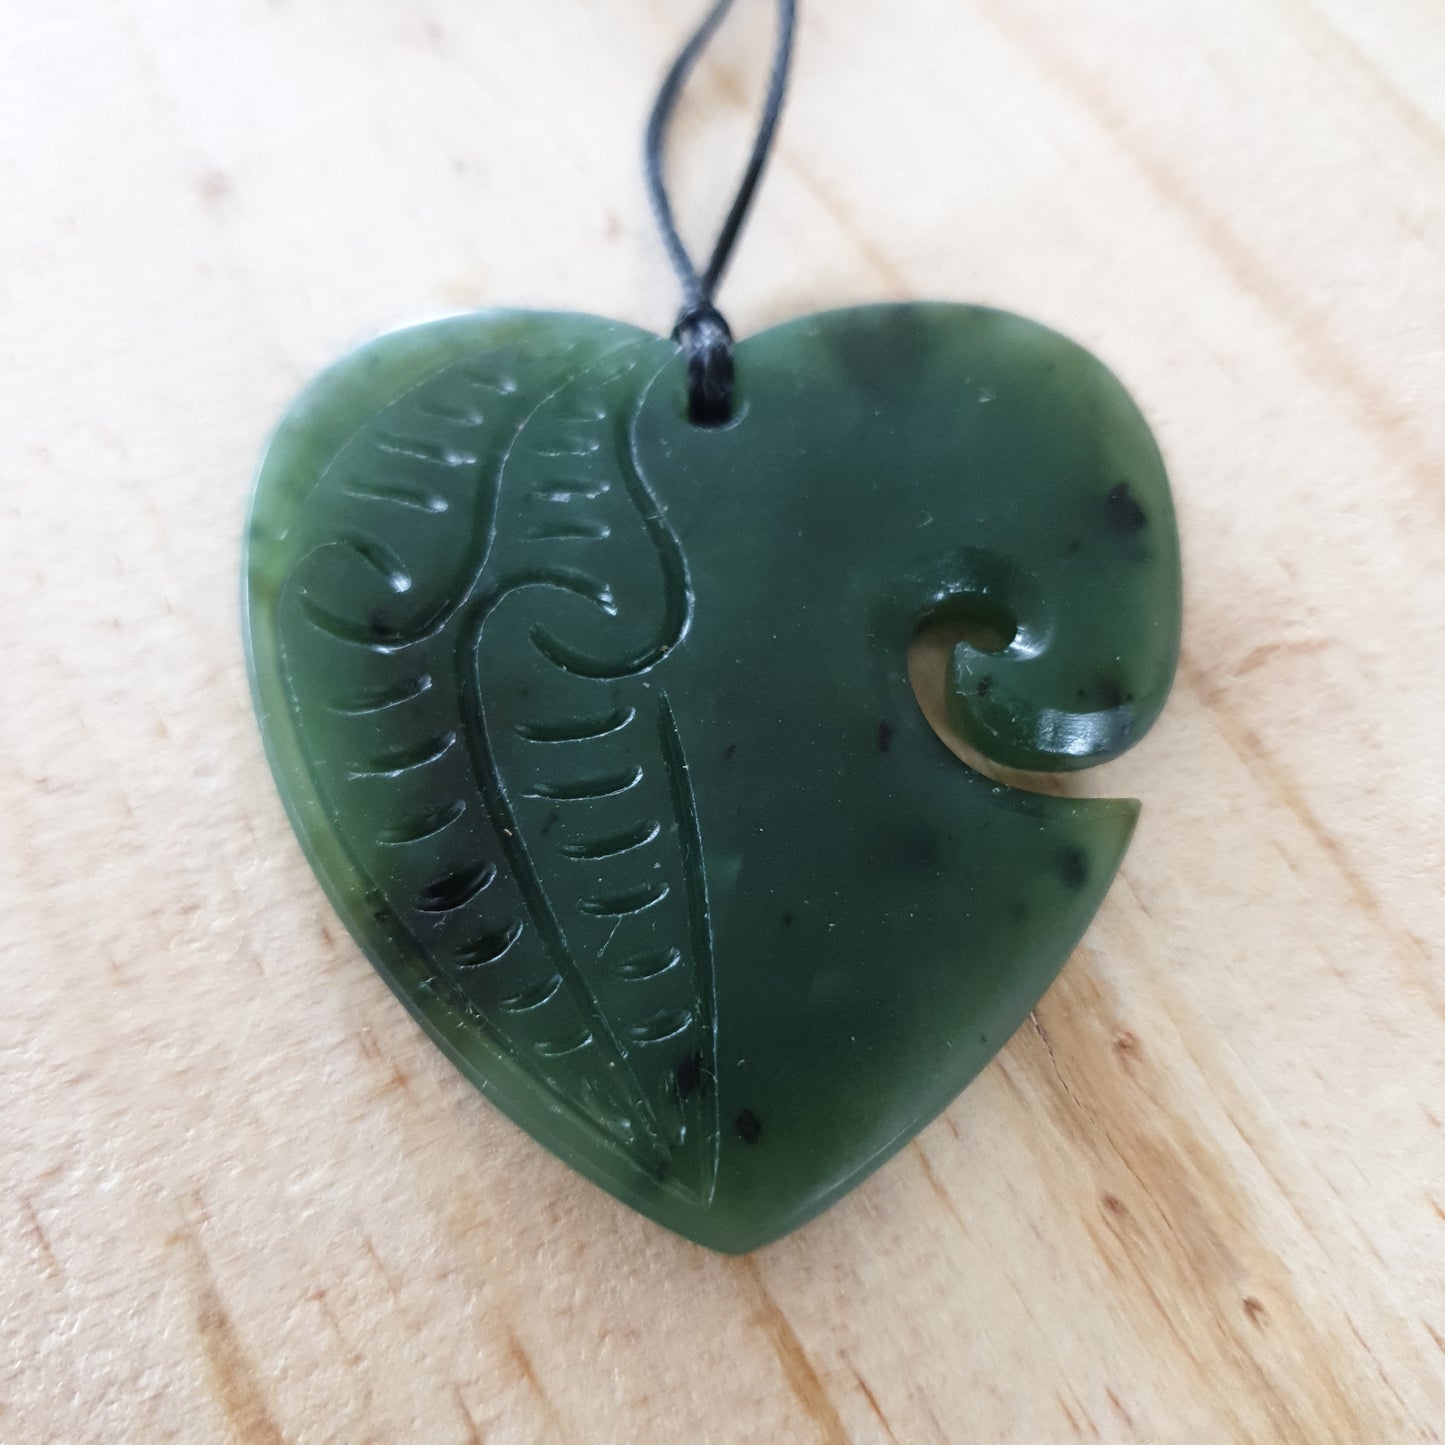 Greenstone Heart Pendant with Carved Detail - Large - Rivendell Shop